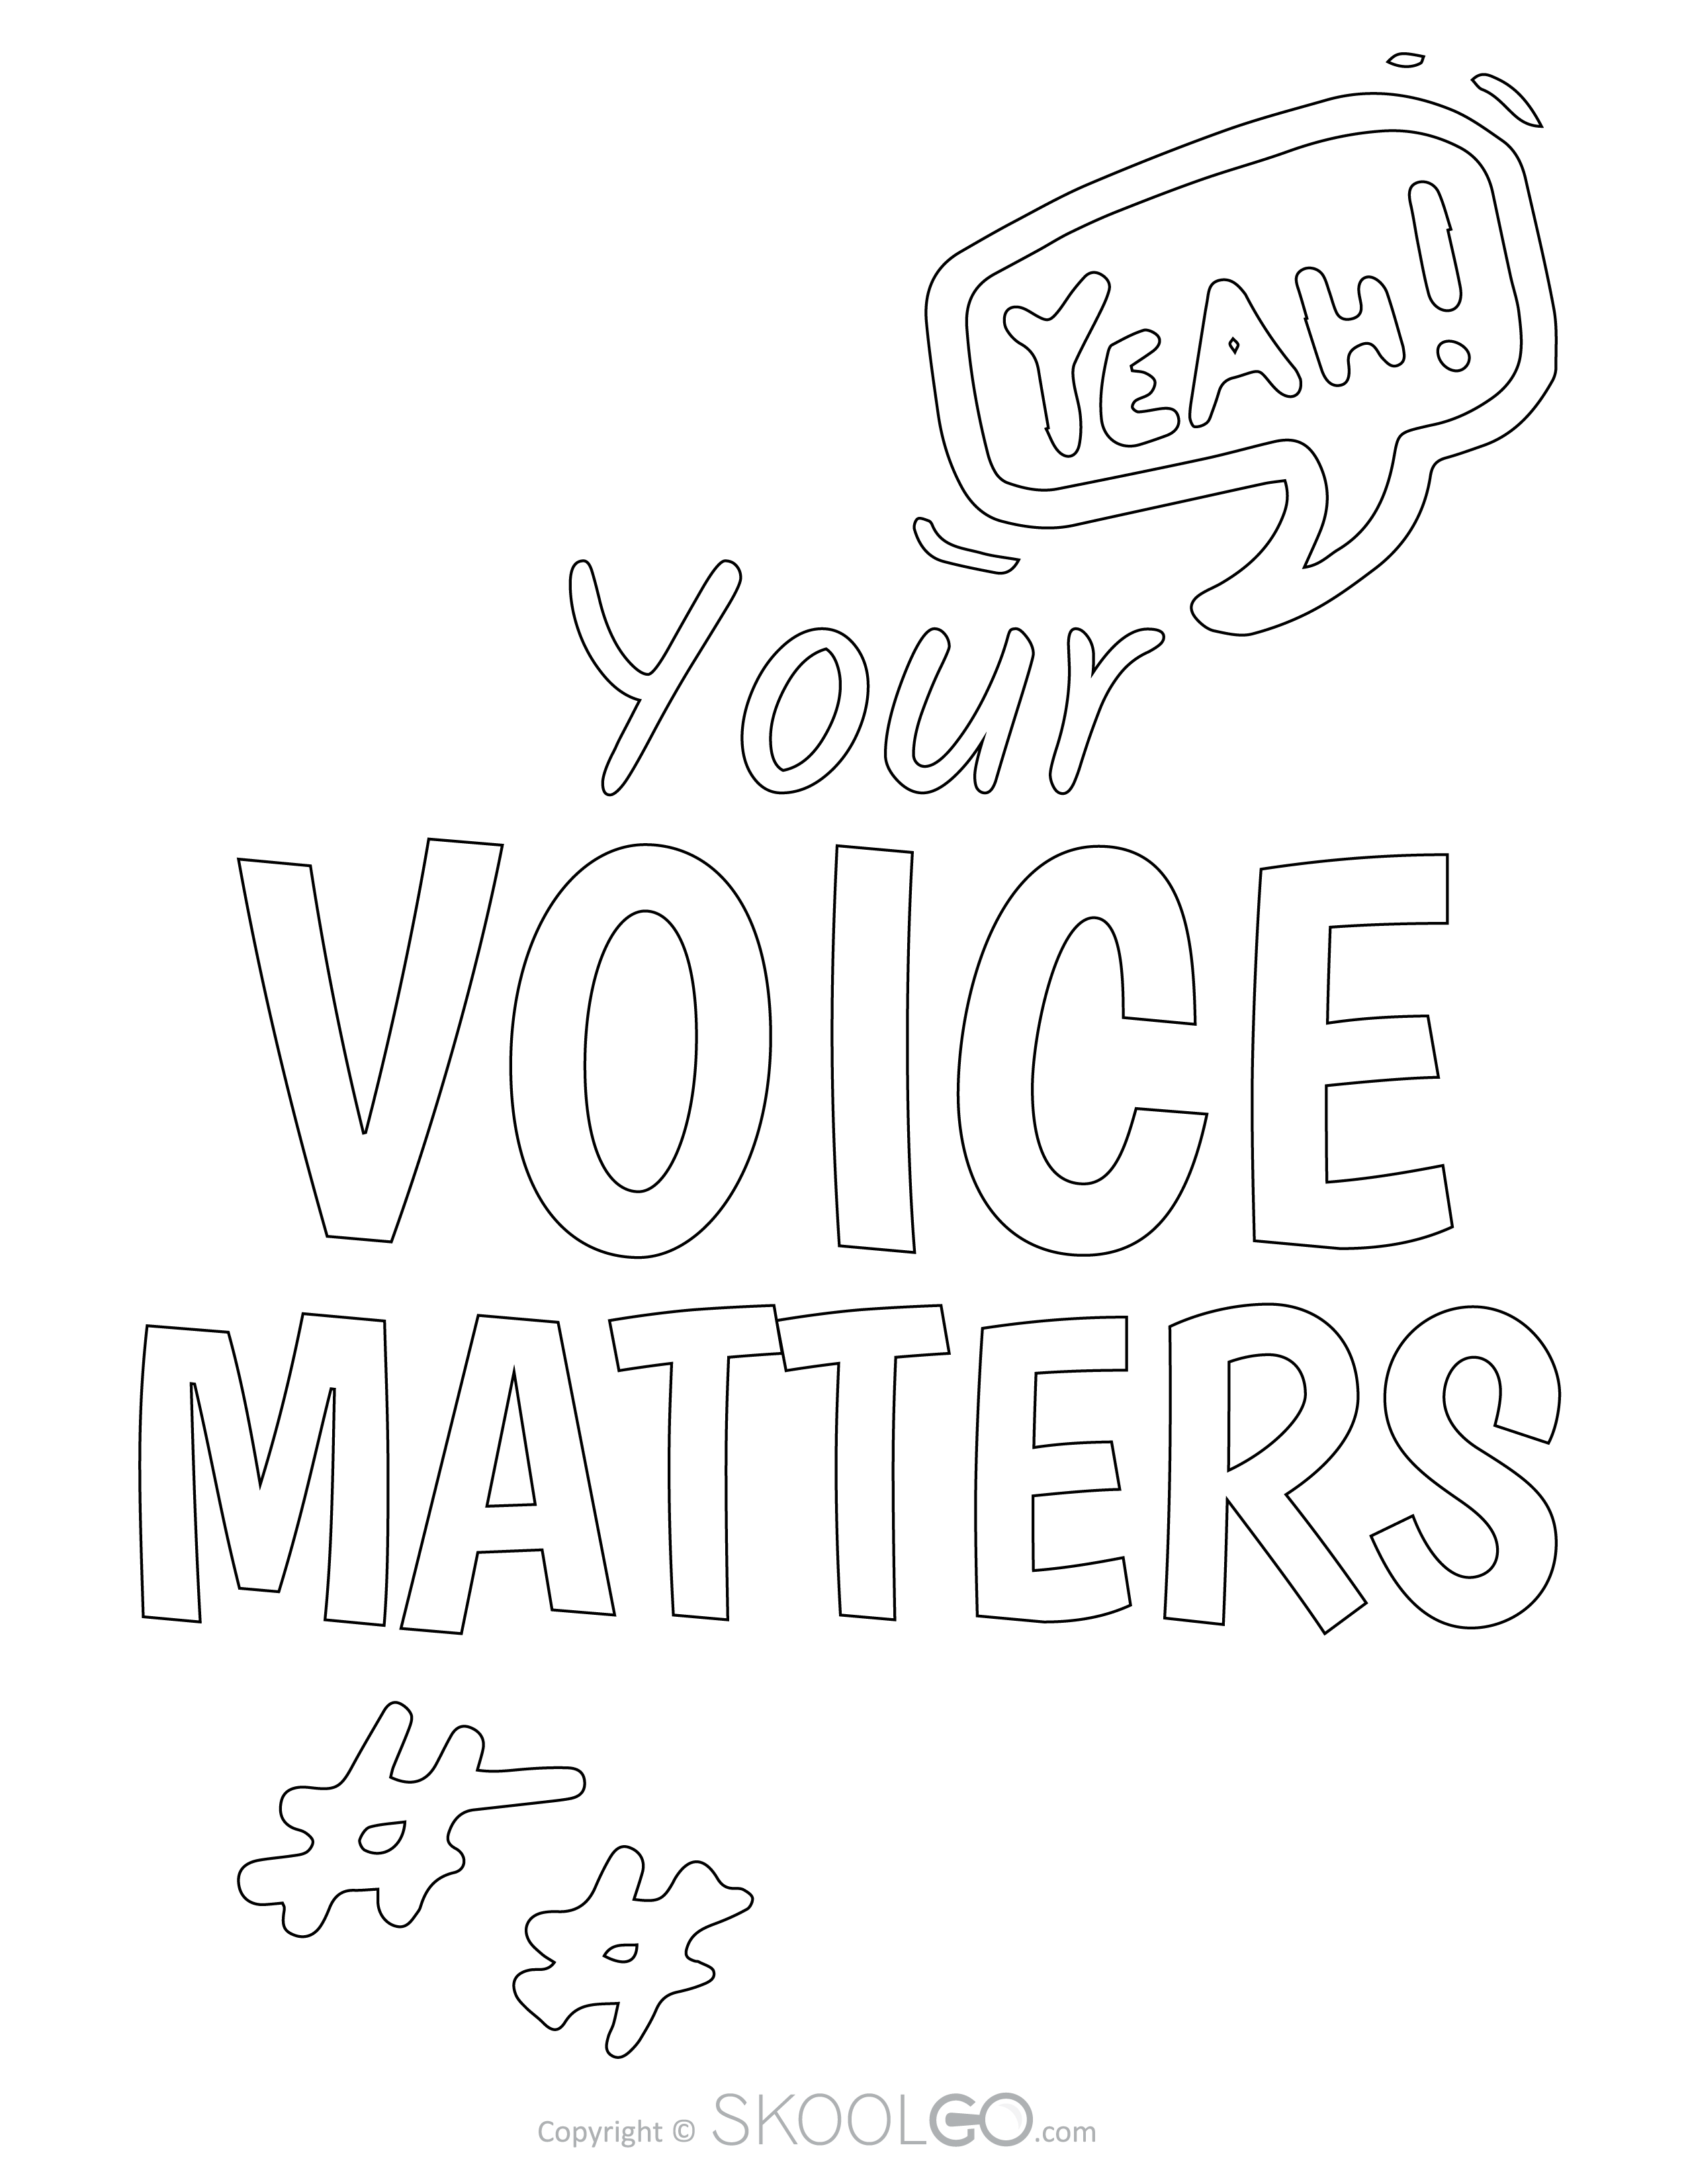 Your Voice Matters - Free Coloring Version Poster